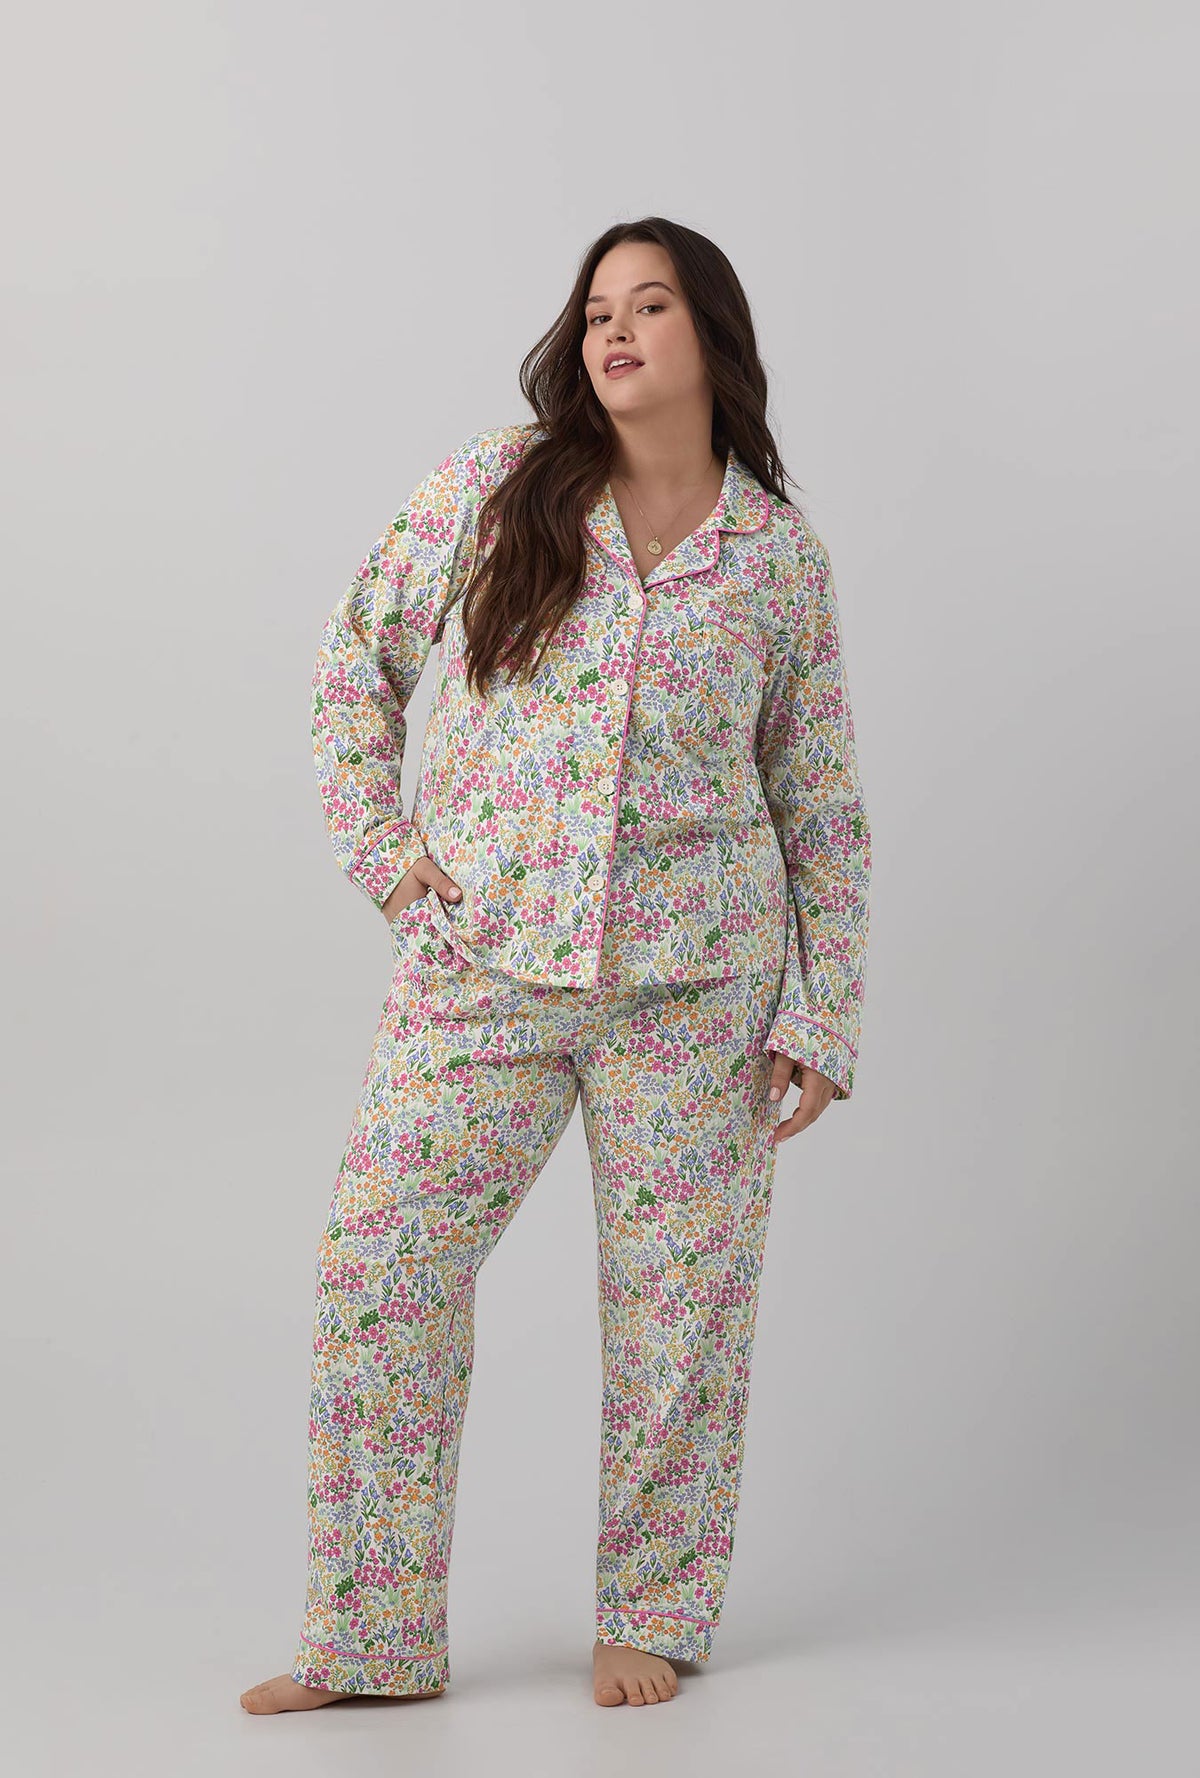 A lady wearing multi color long sleeve classic stretch jersey plus size pj set with cottage garden print.